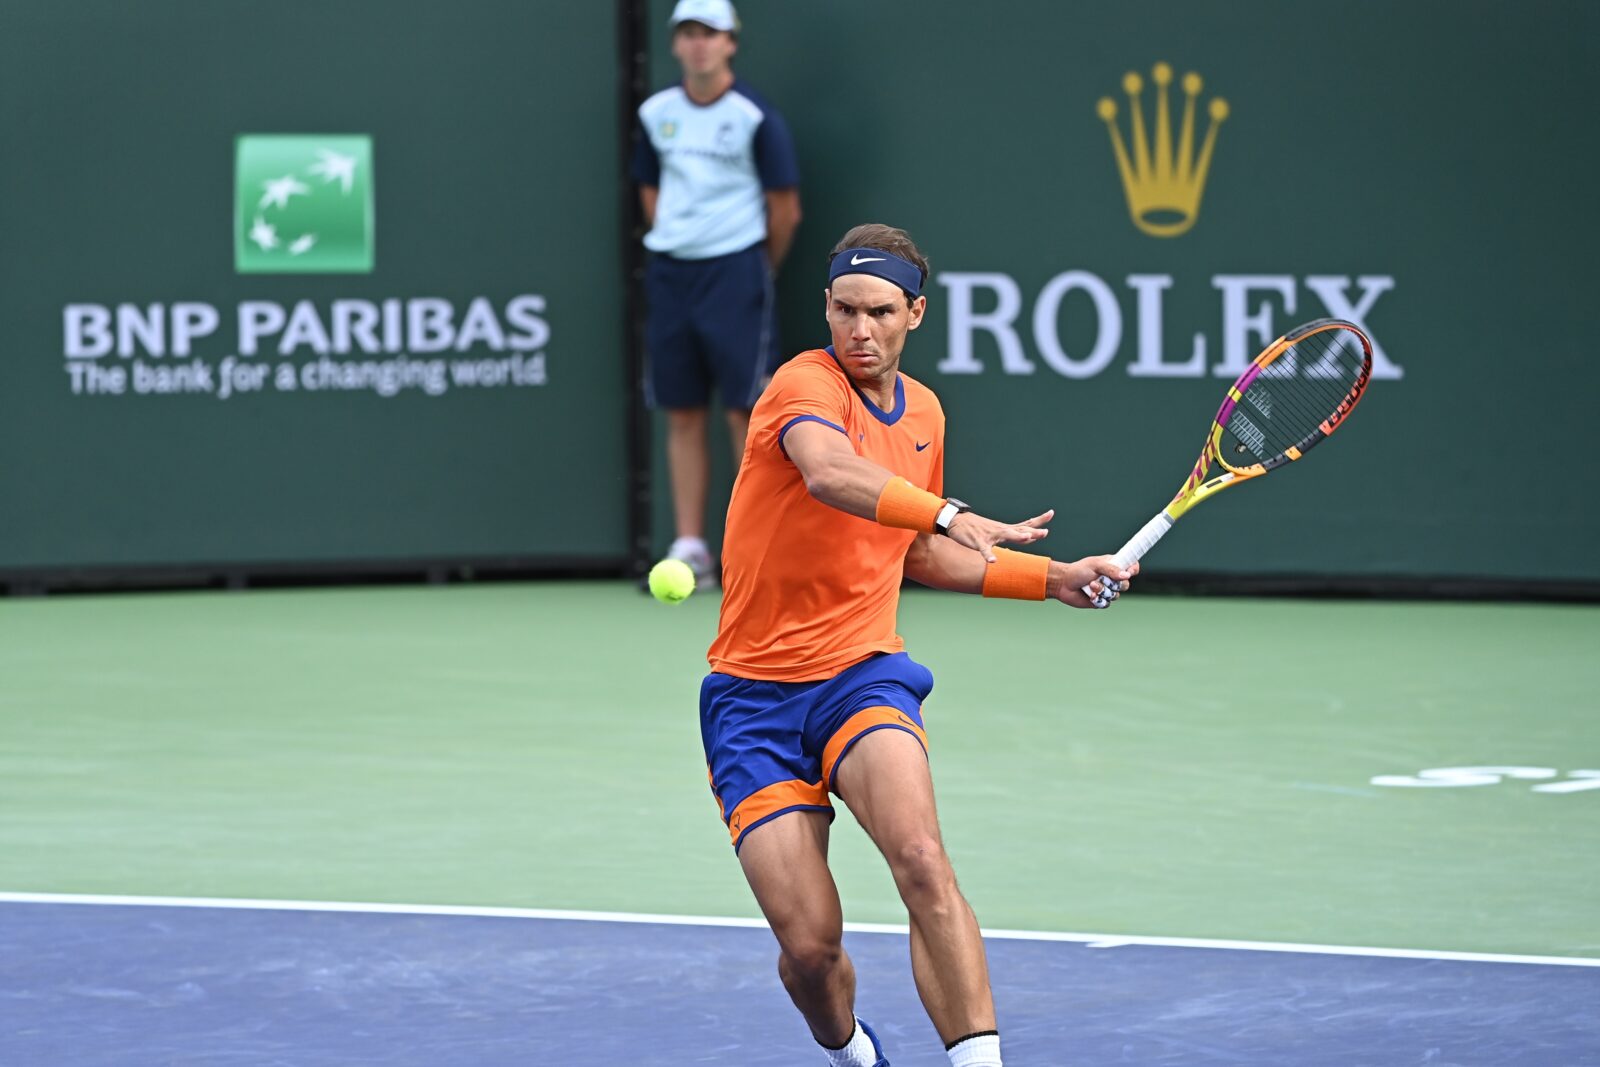 Injury concerns for Rafael Nadal after Indian Wells loss - Tennis News